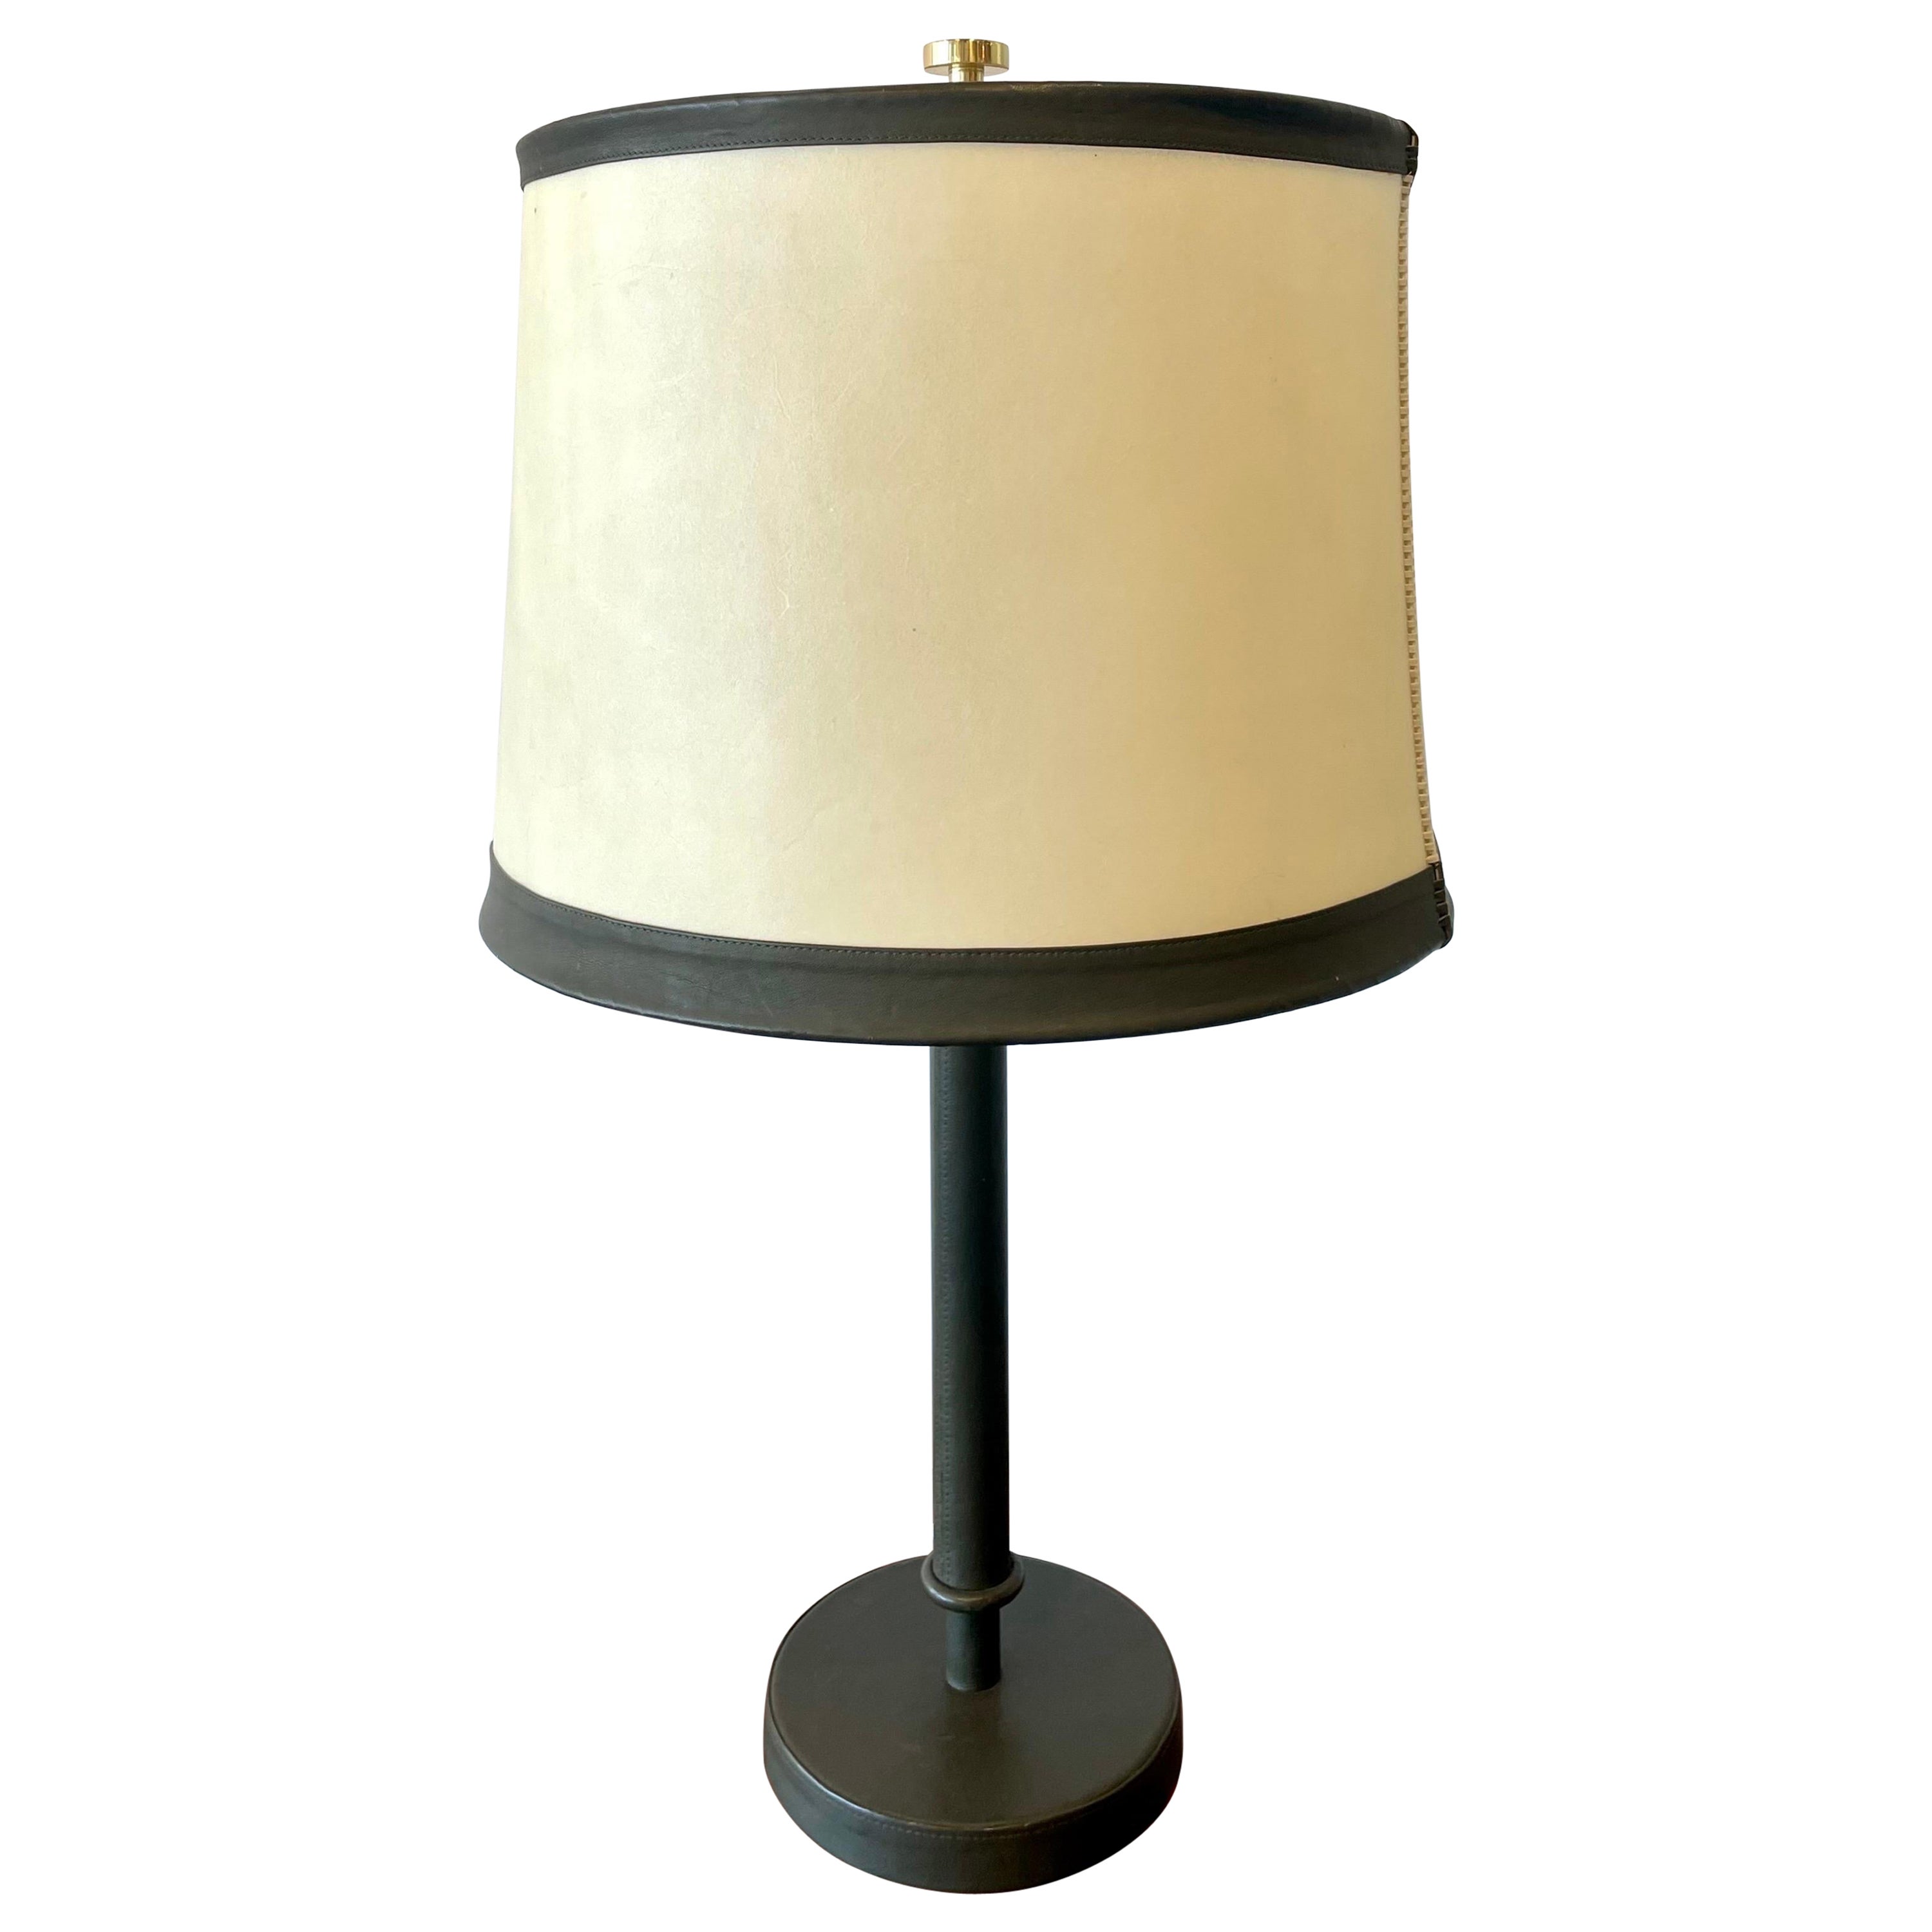 Adnet Style Vintage Green Leather and Parchment Shade Table Lamp